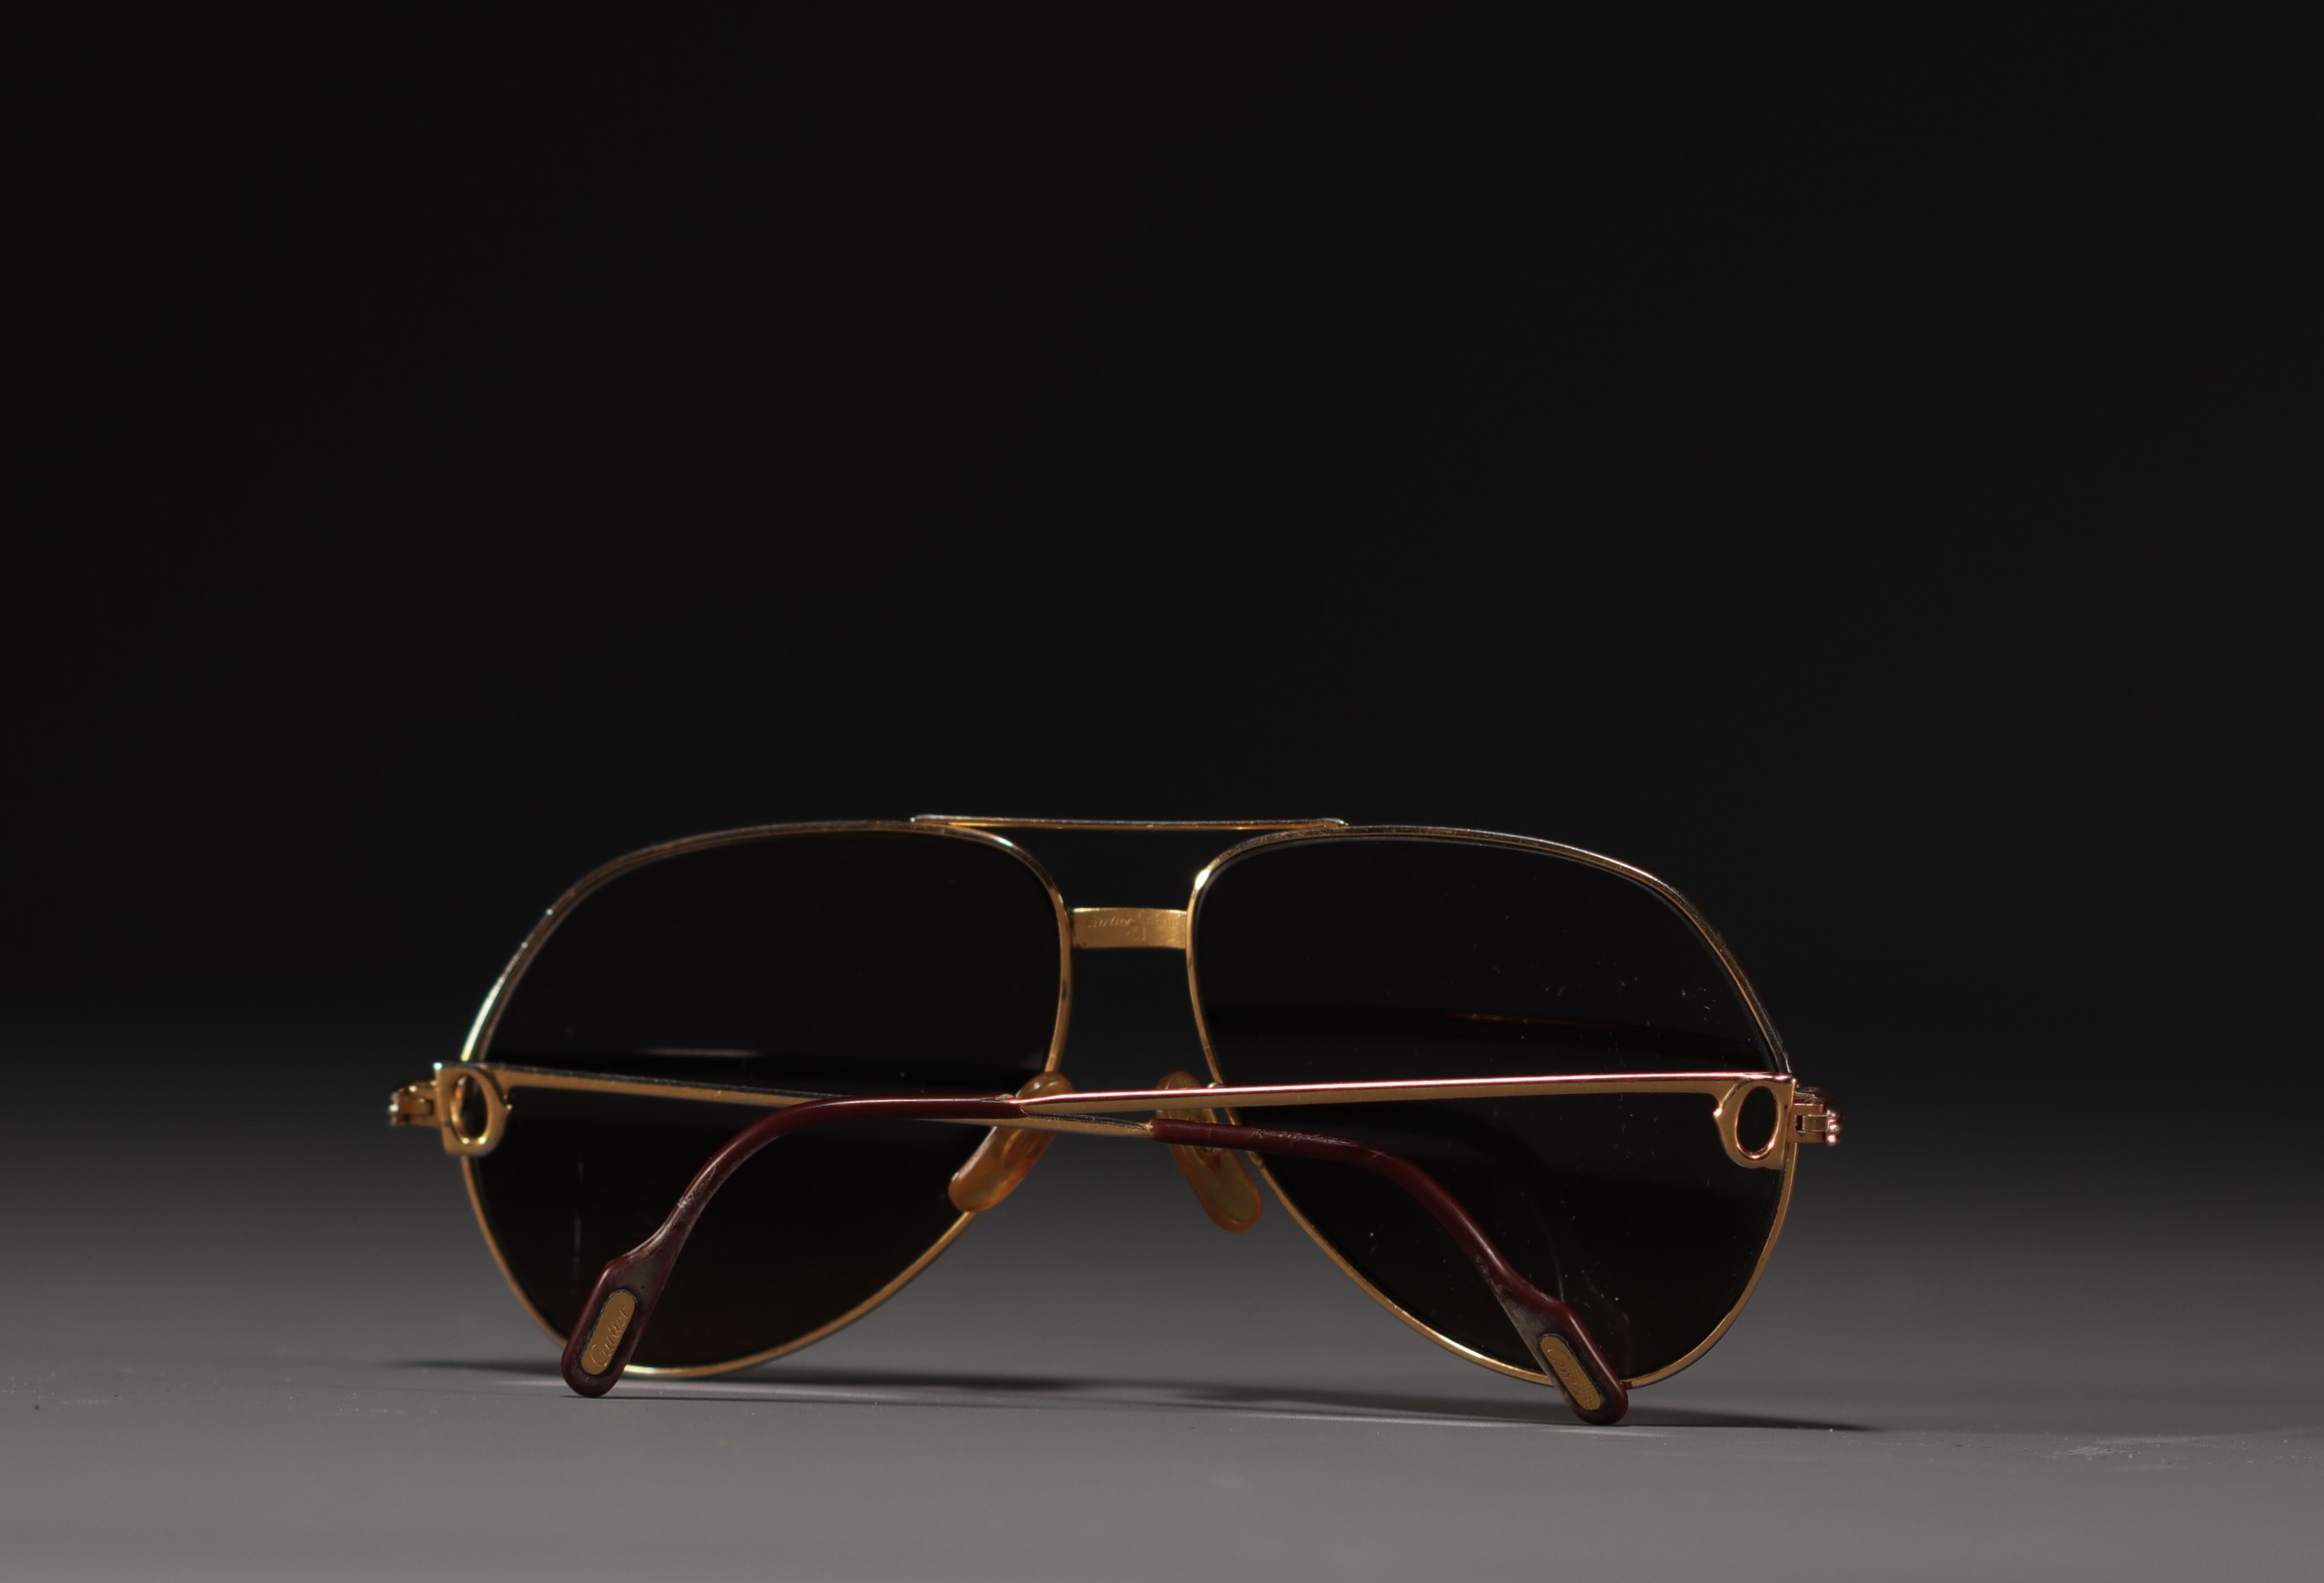 Cartier - "Must" Pair of vintage sunglasses. - Image 2 of 5